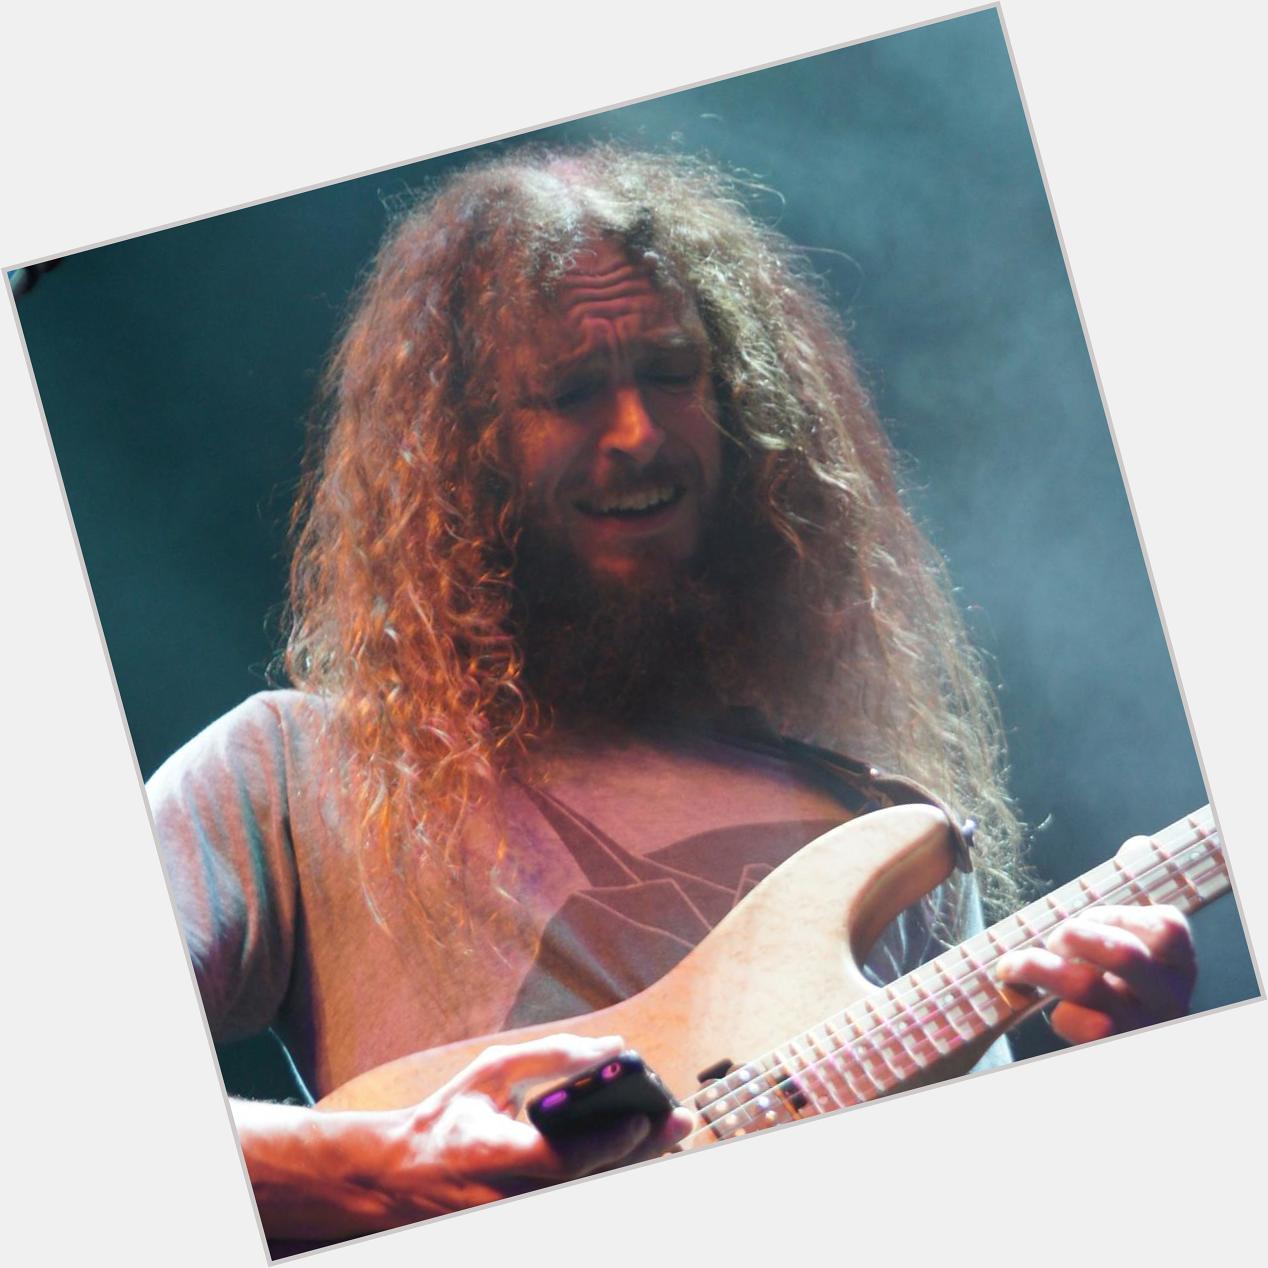 Lift your glass and join us in wishing Guthrie Govan a very happy birthday!  